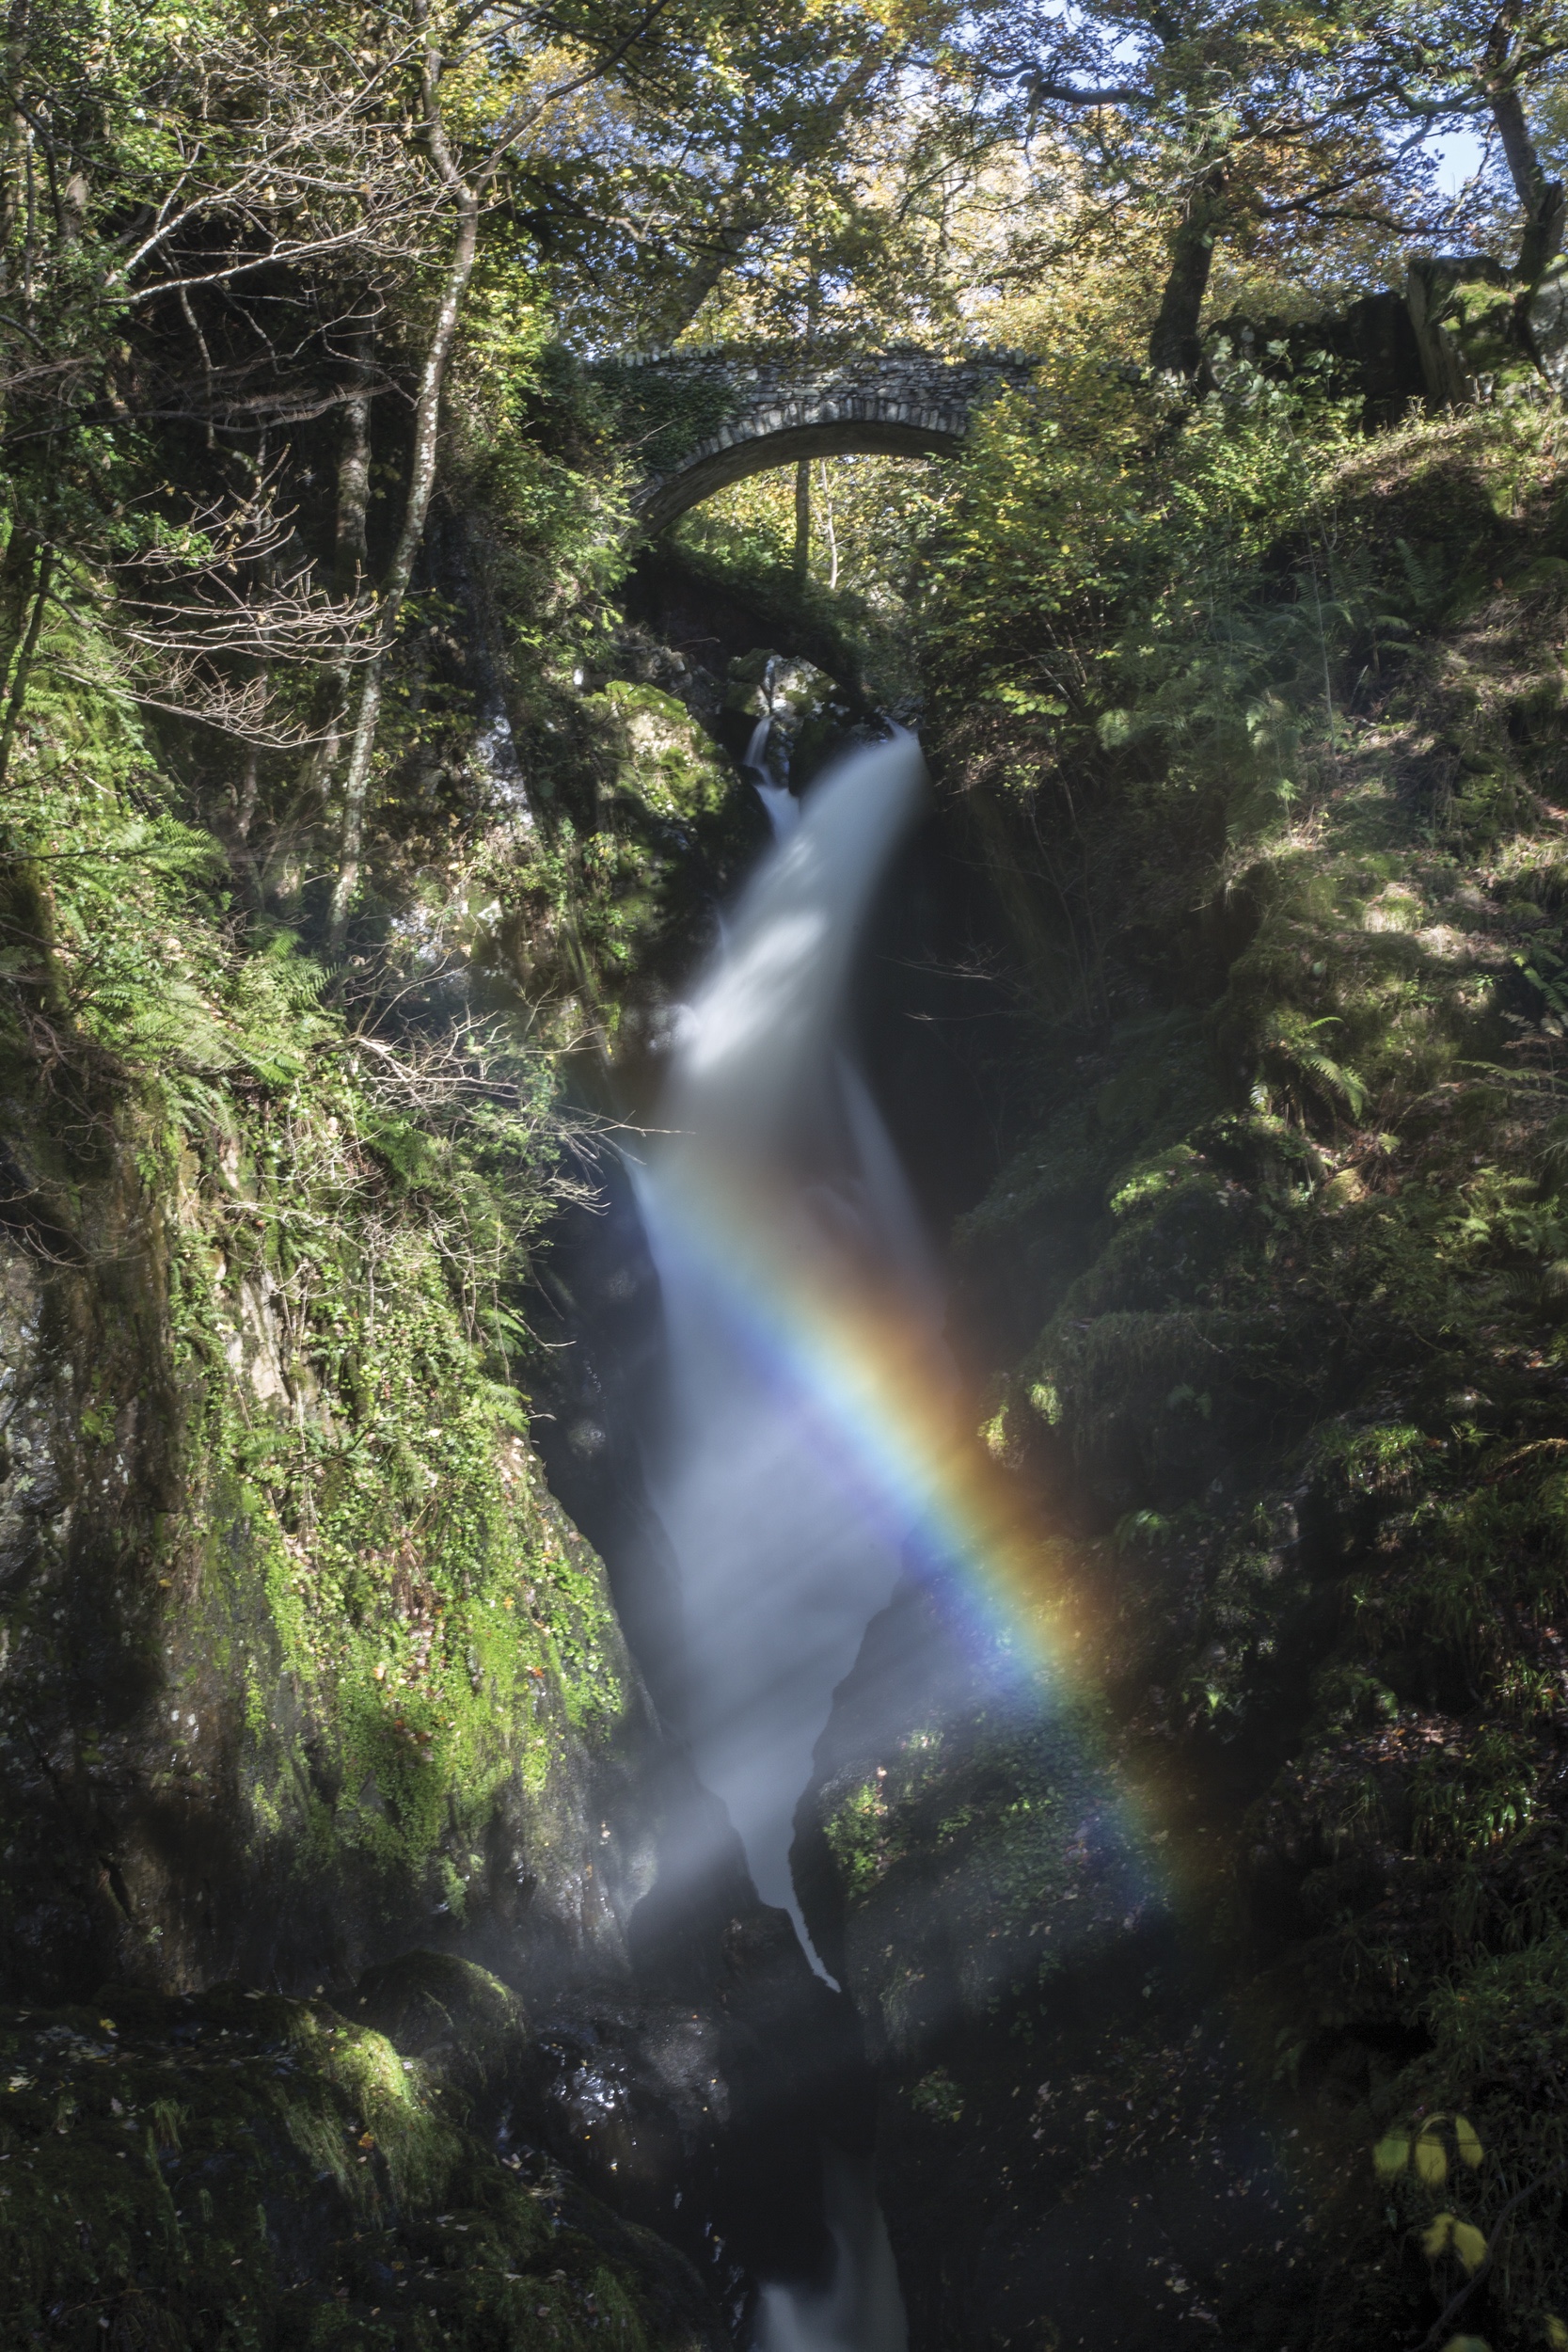 Aira Force rainbow – 1pm in late October at Aira Force.